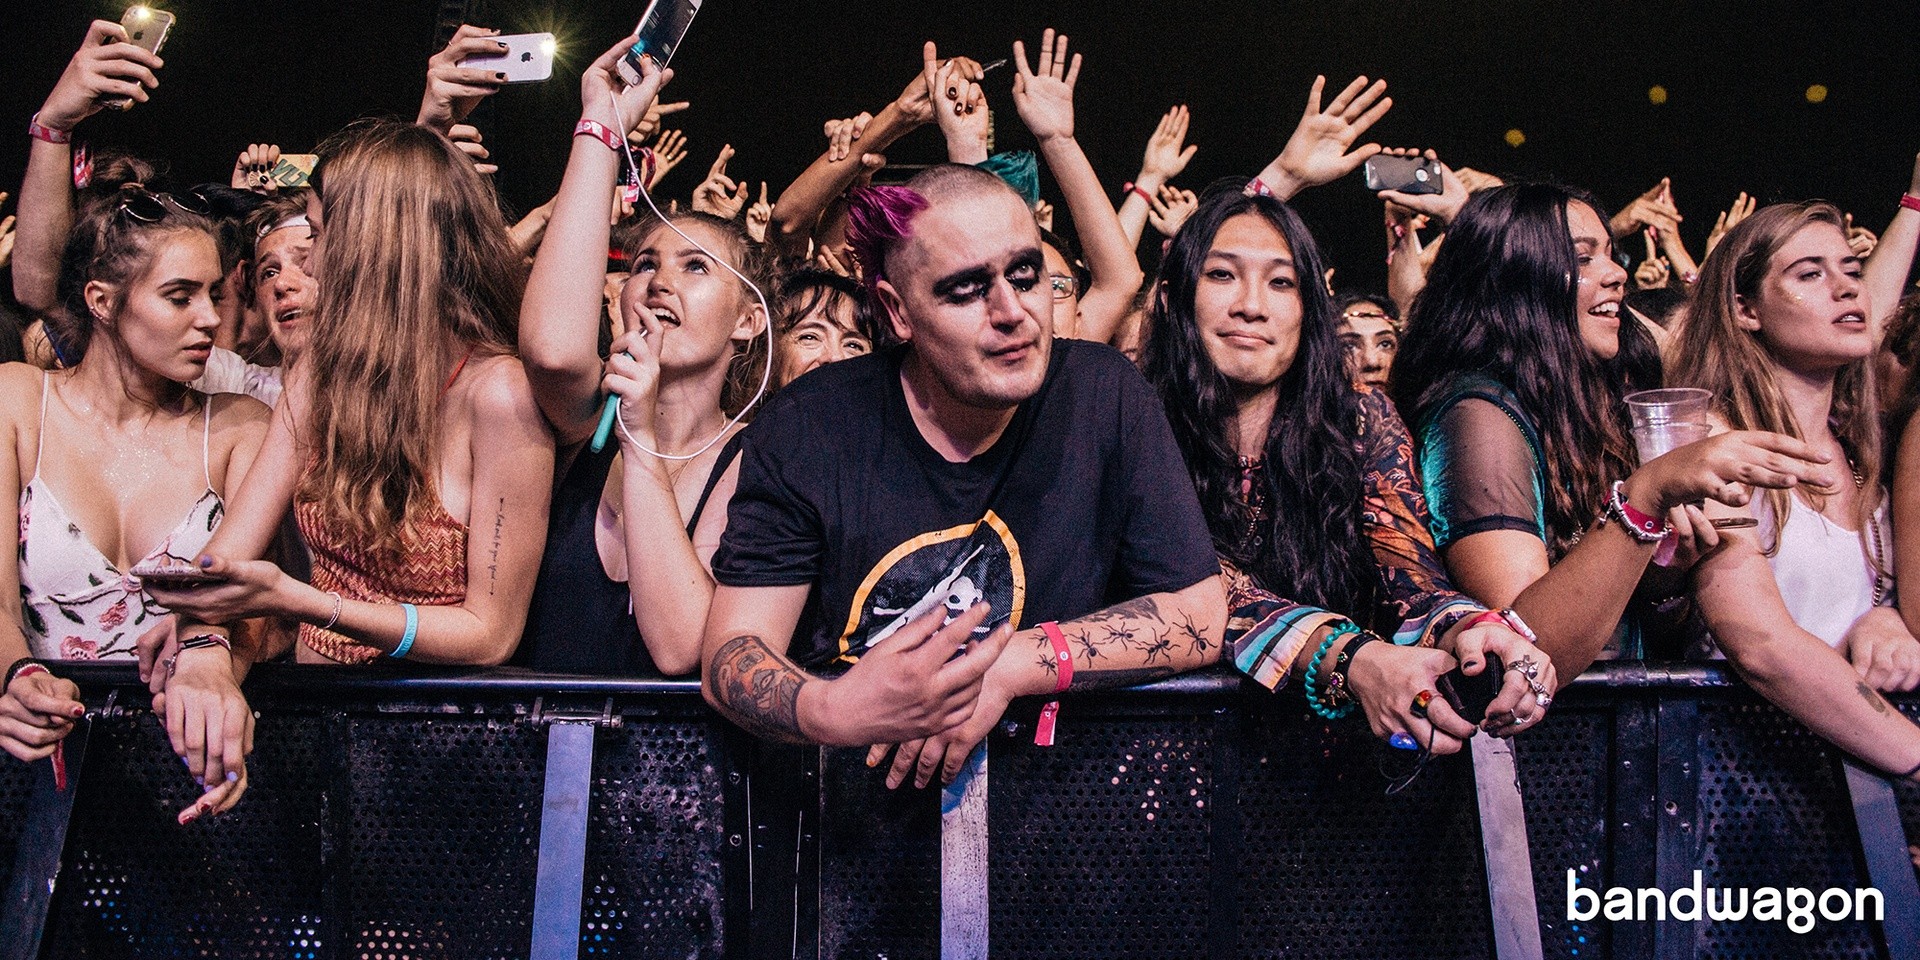 45 European and North American music festivals pledge gender-balanced lineups by 2022